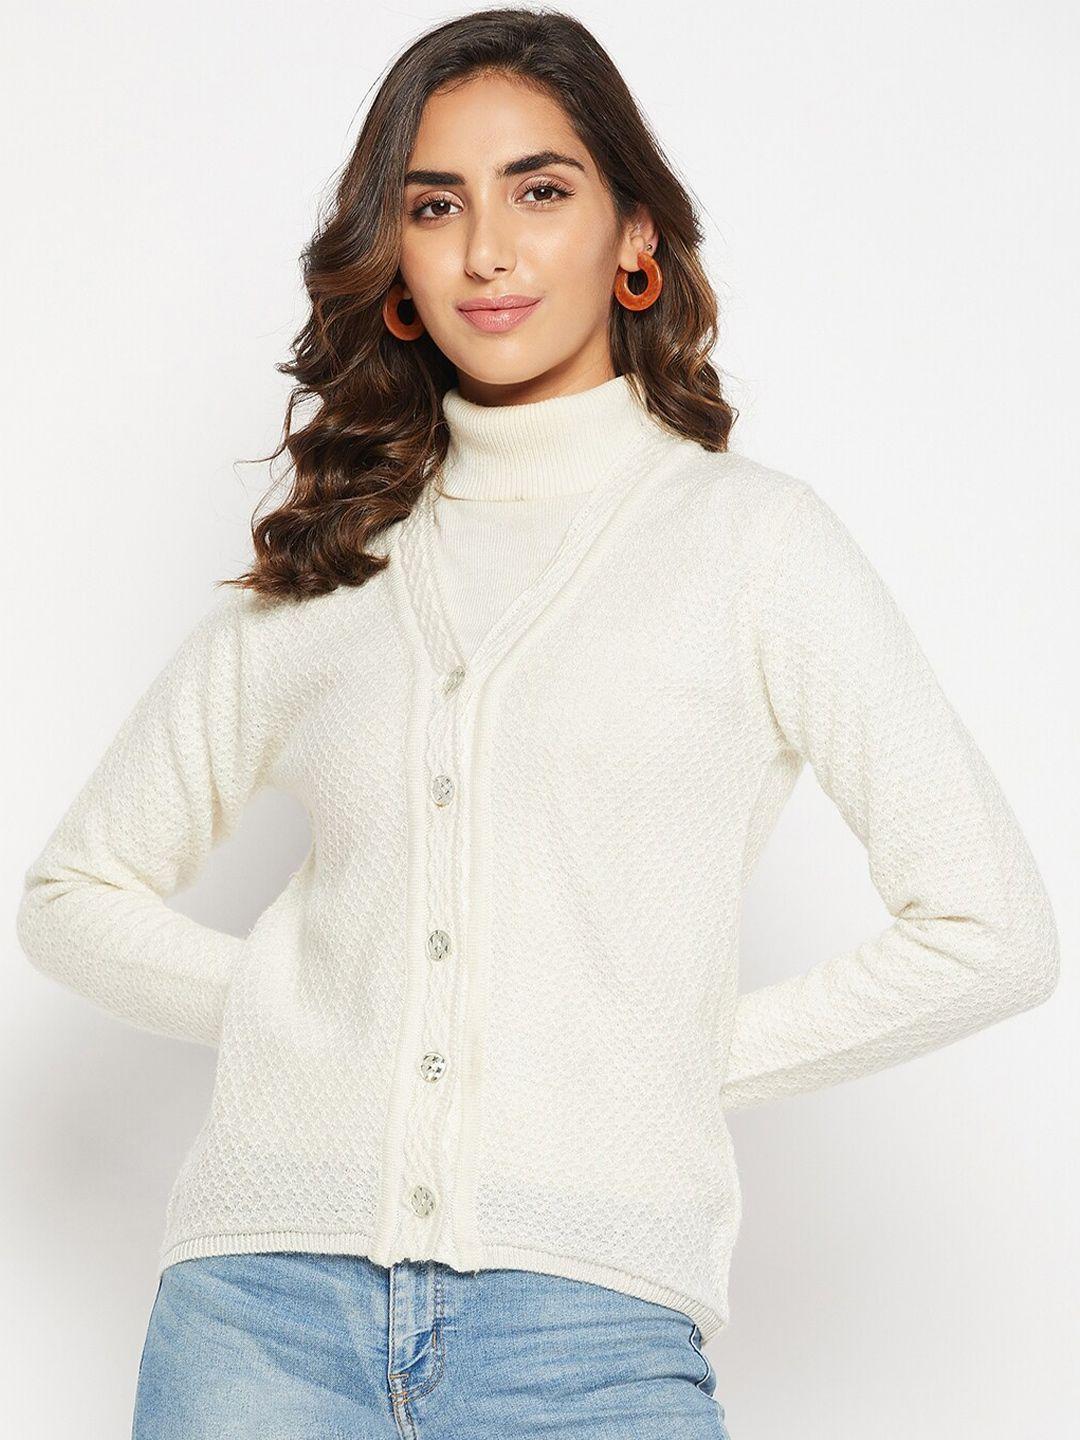 crozo by cantabil women wool off white cable knit cardigan